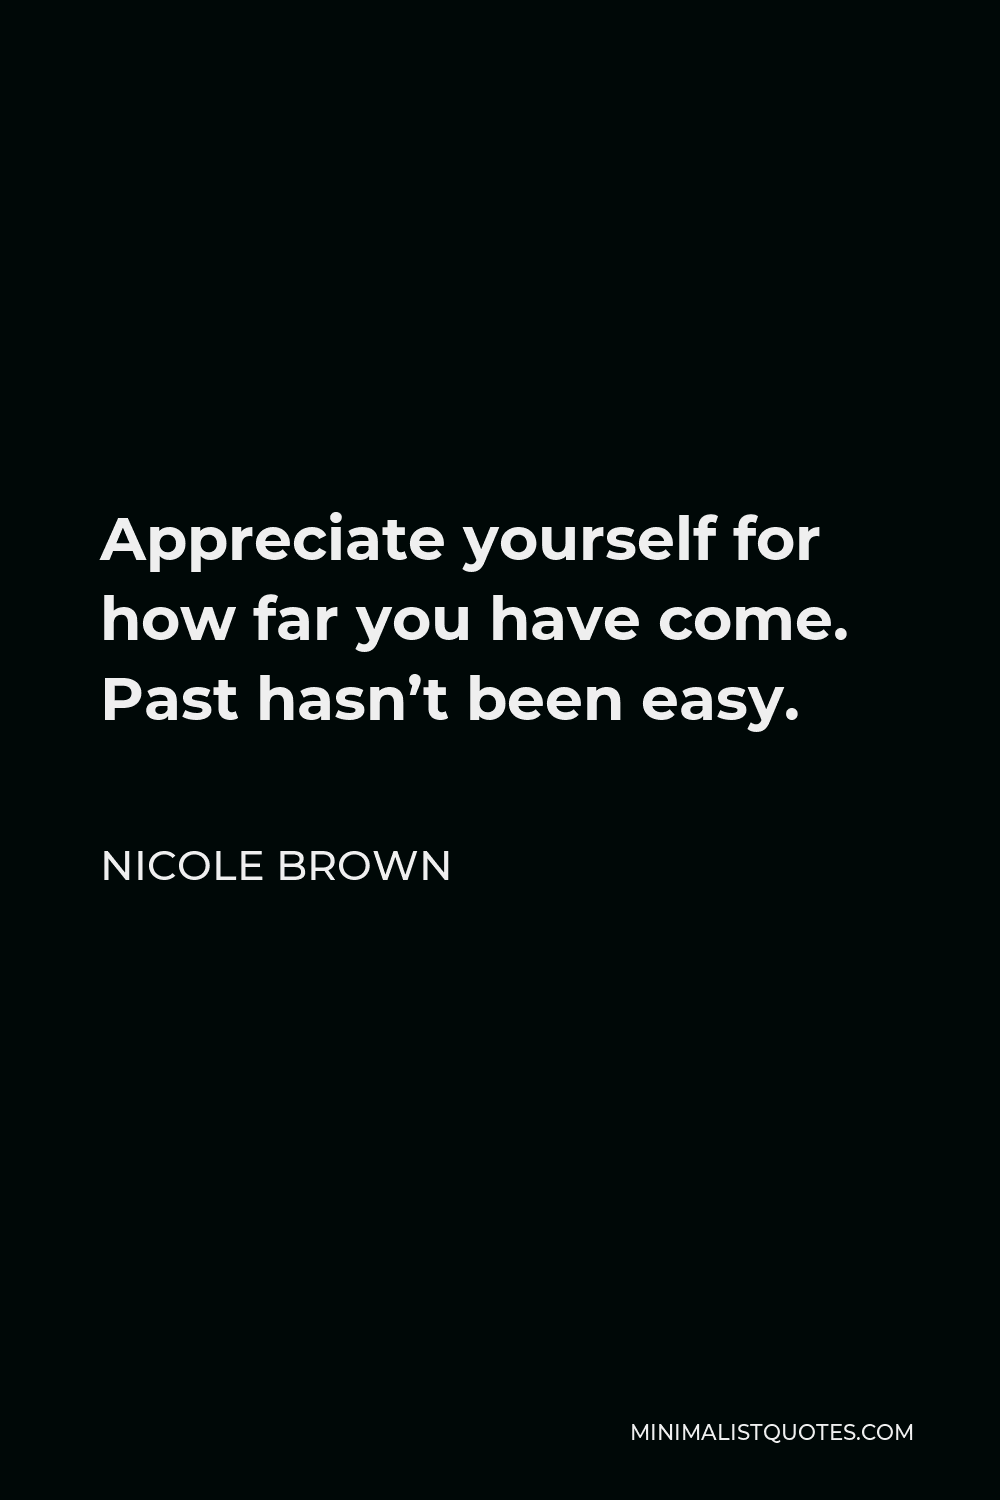 Nicole Brown Quote - Appreciate yourself for how far you have come. Past hasn’t been easy.